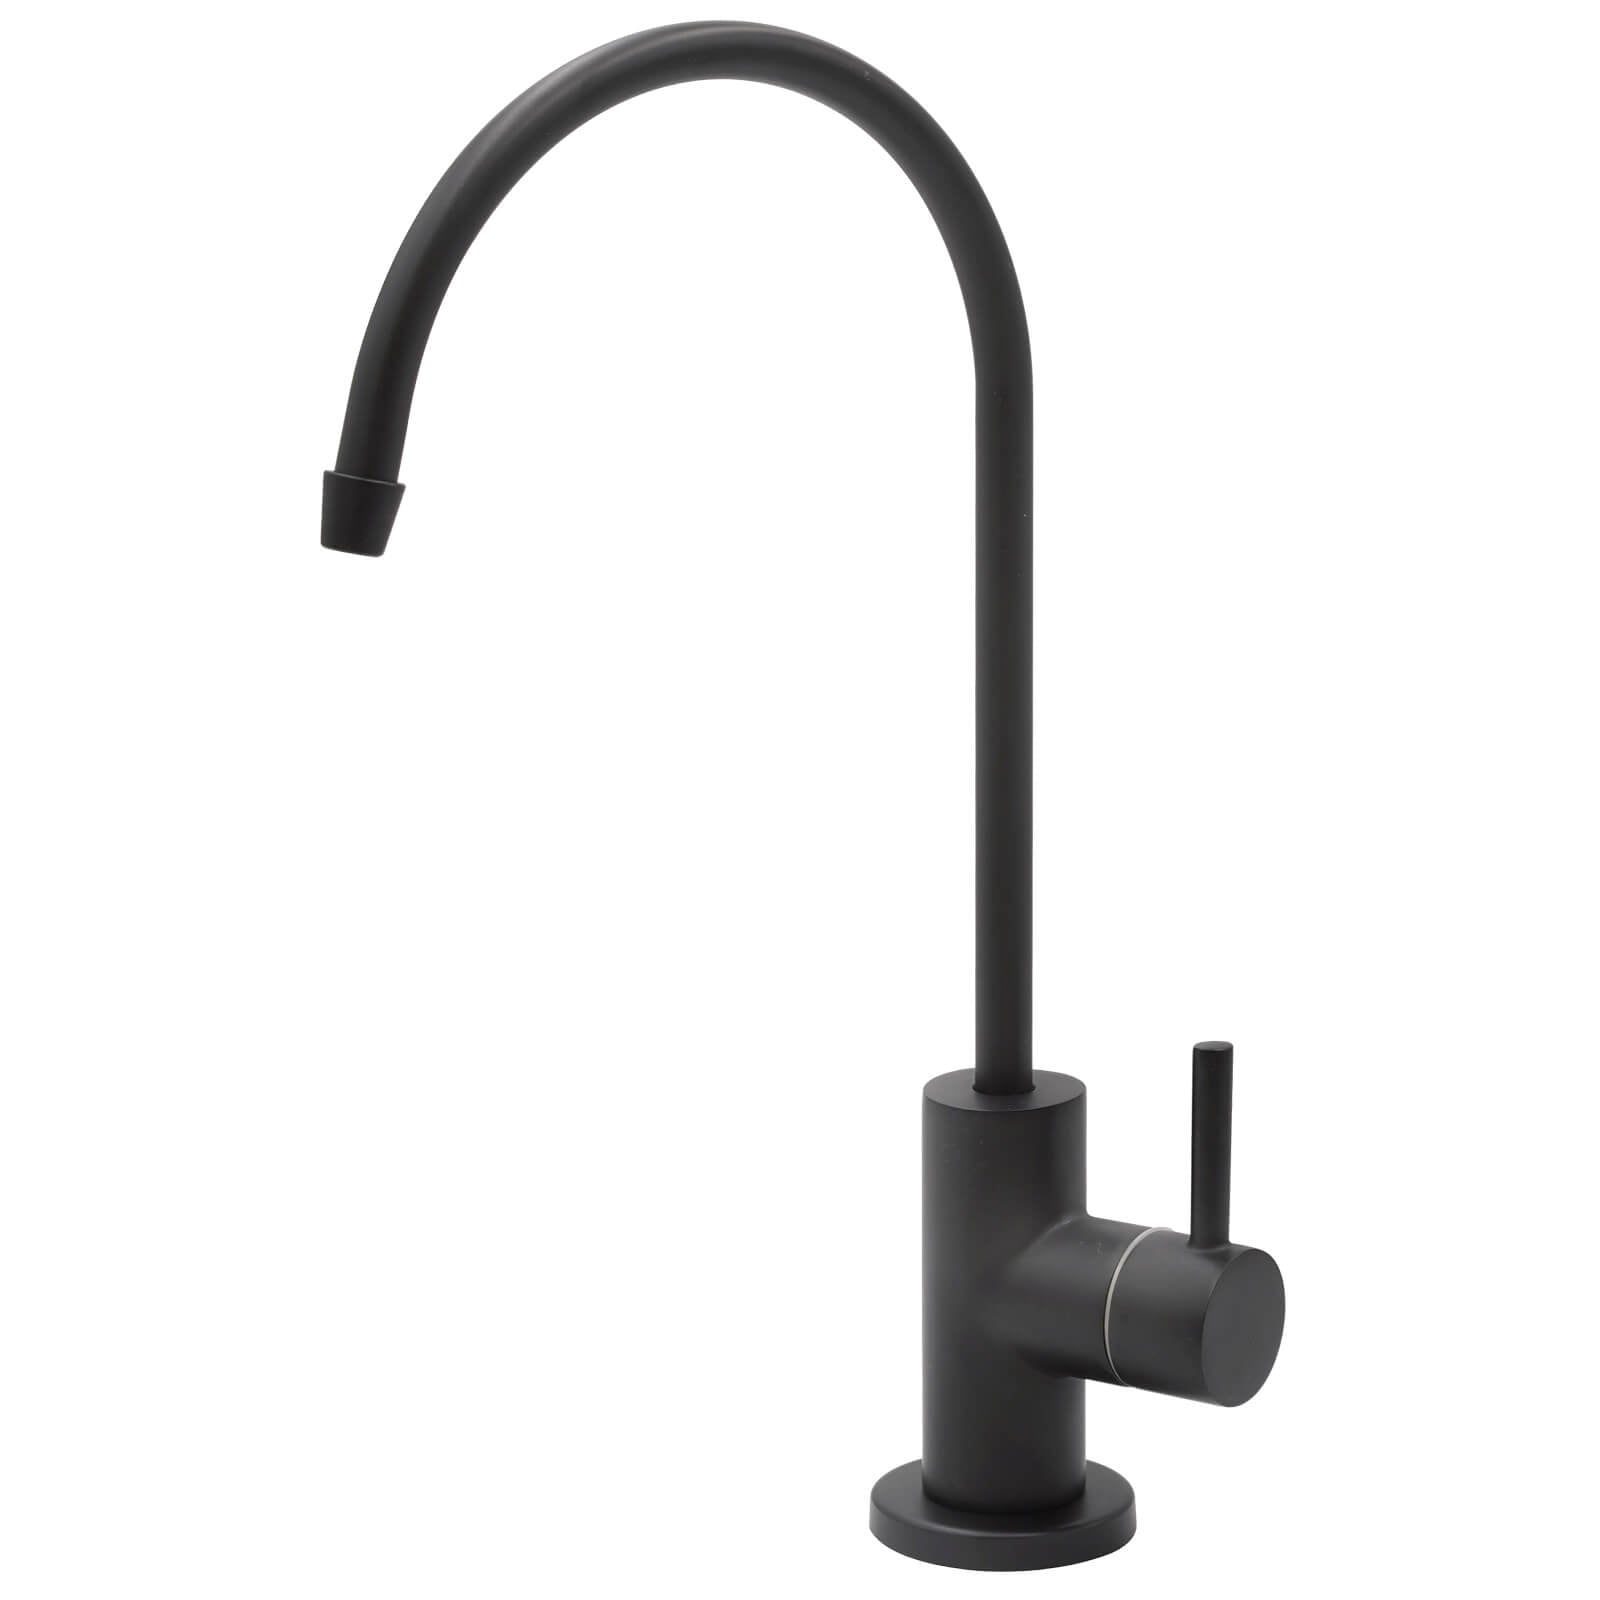 Slake Modern-Styled Water Filter Faucet